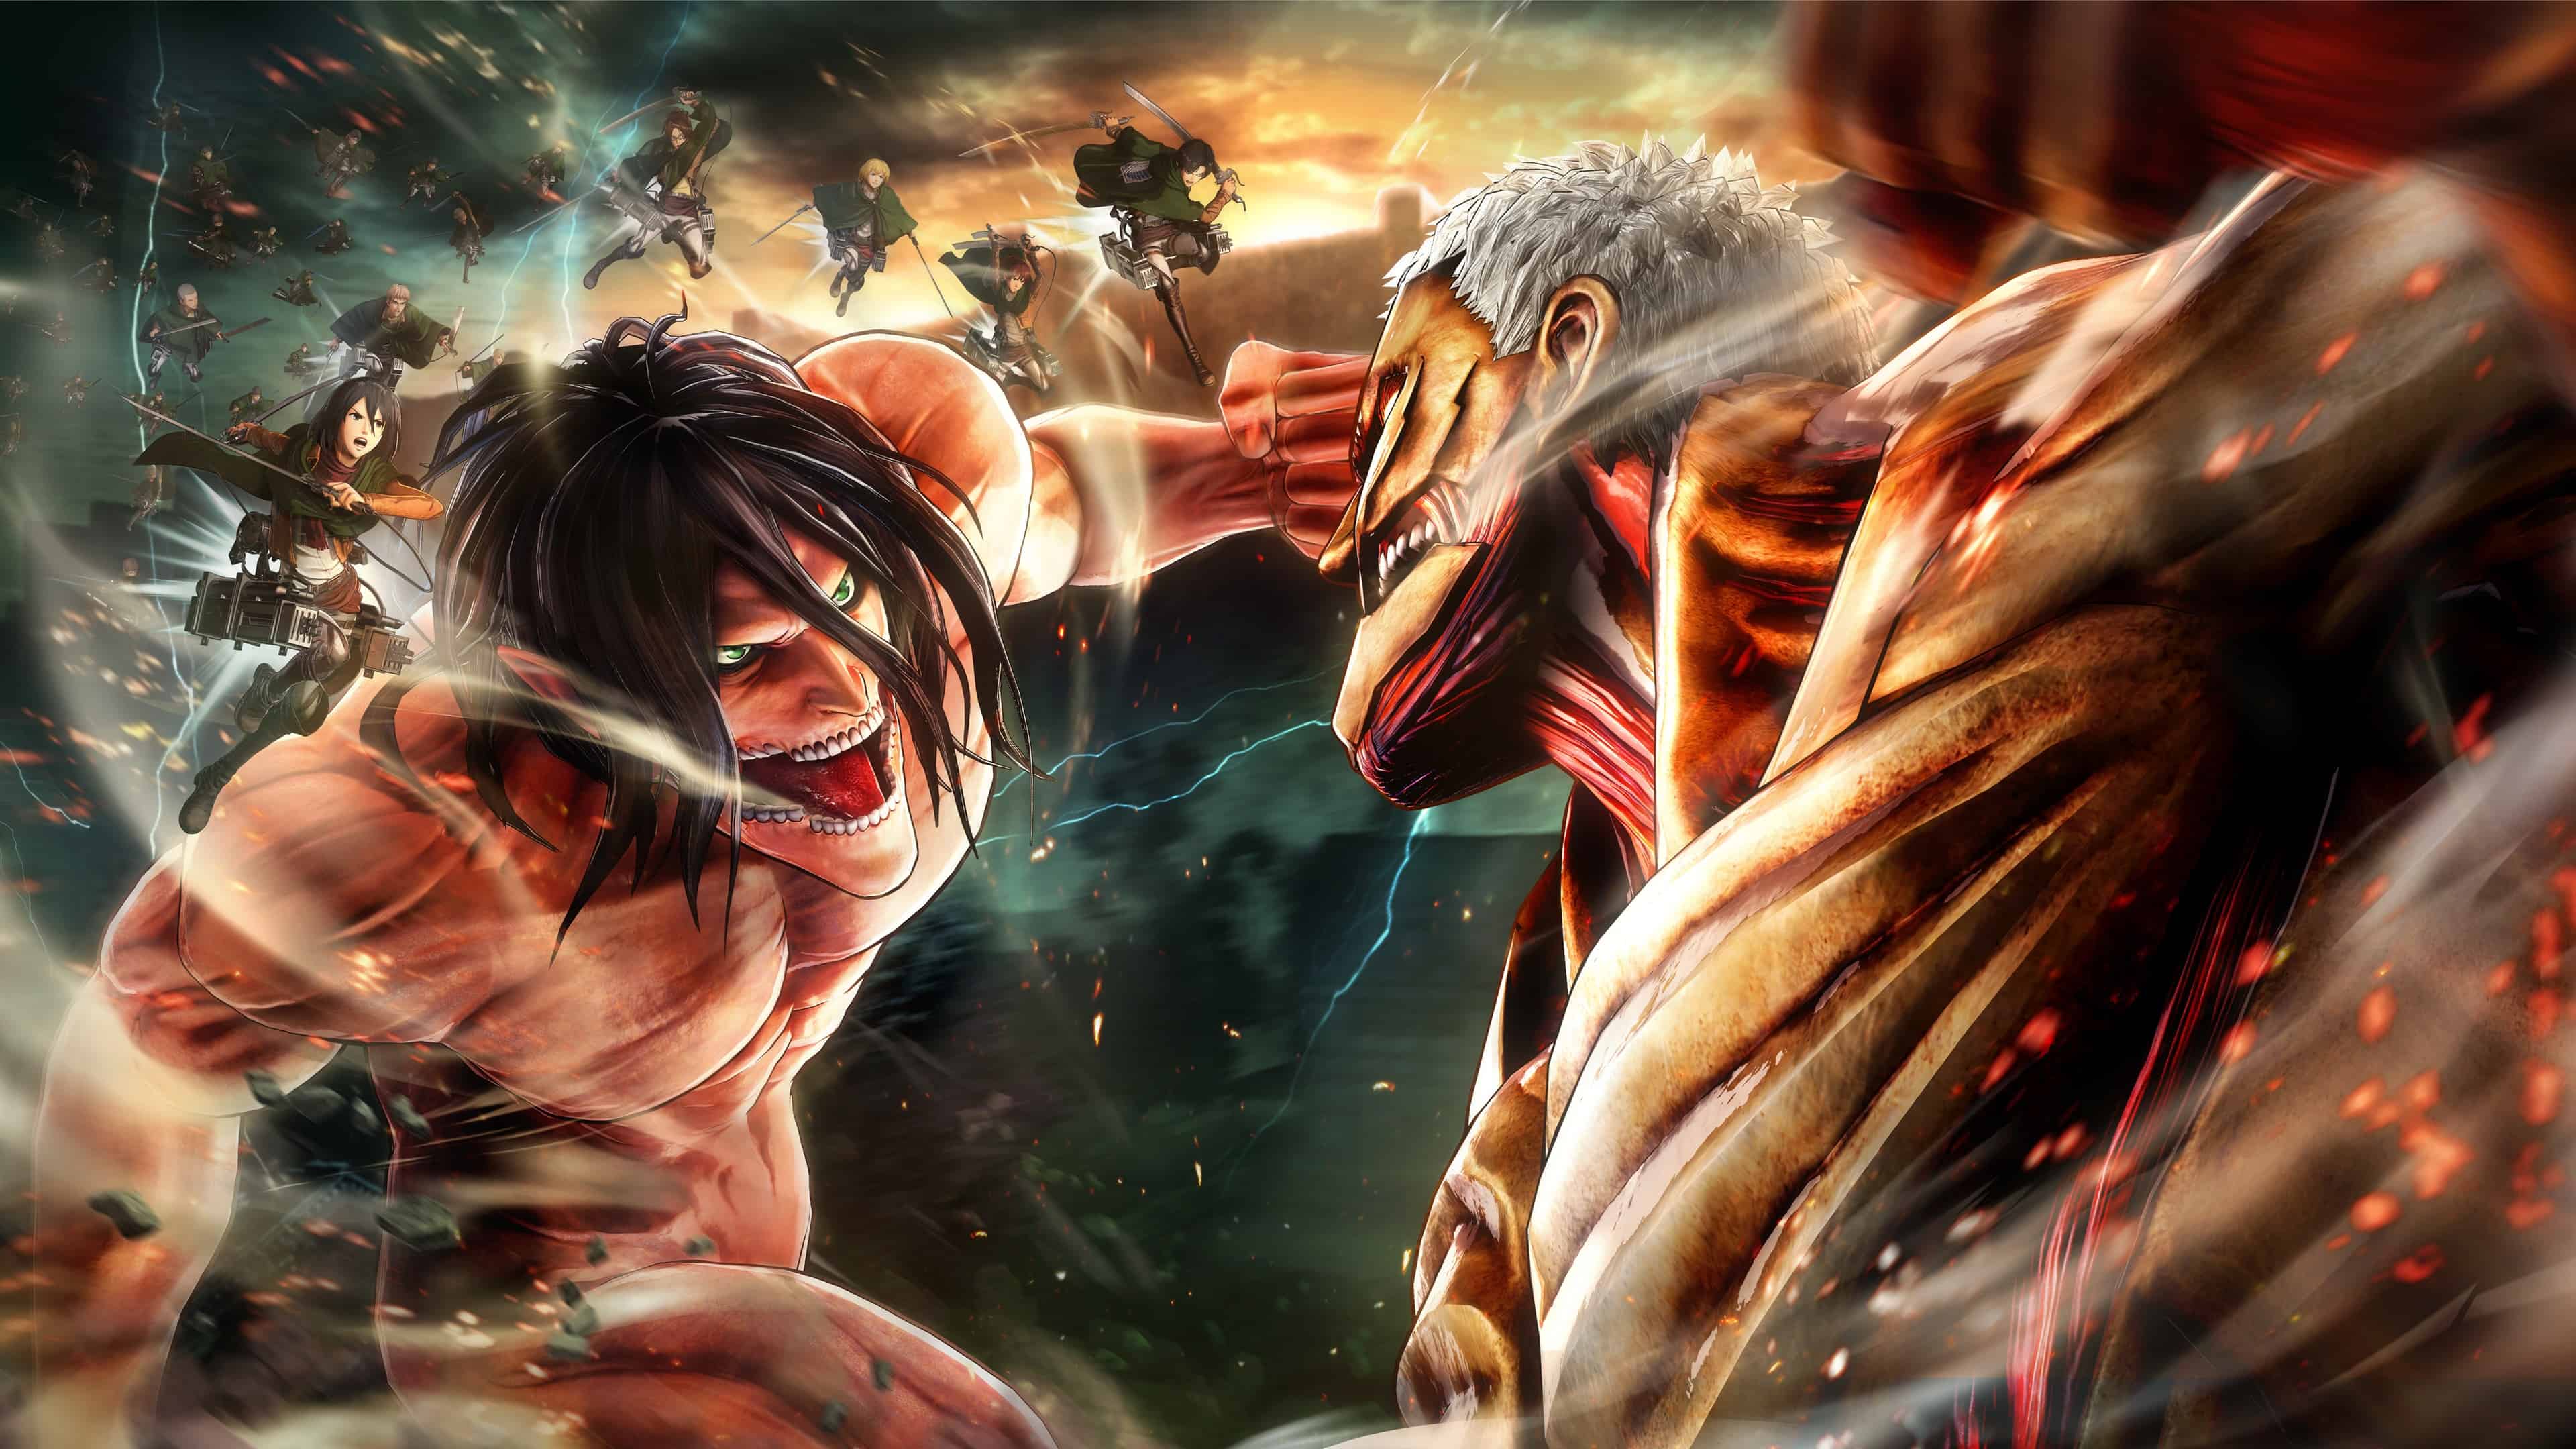 attack on titan game pc free online